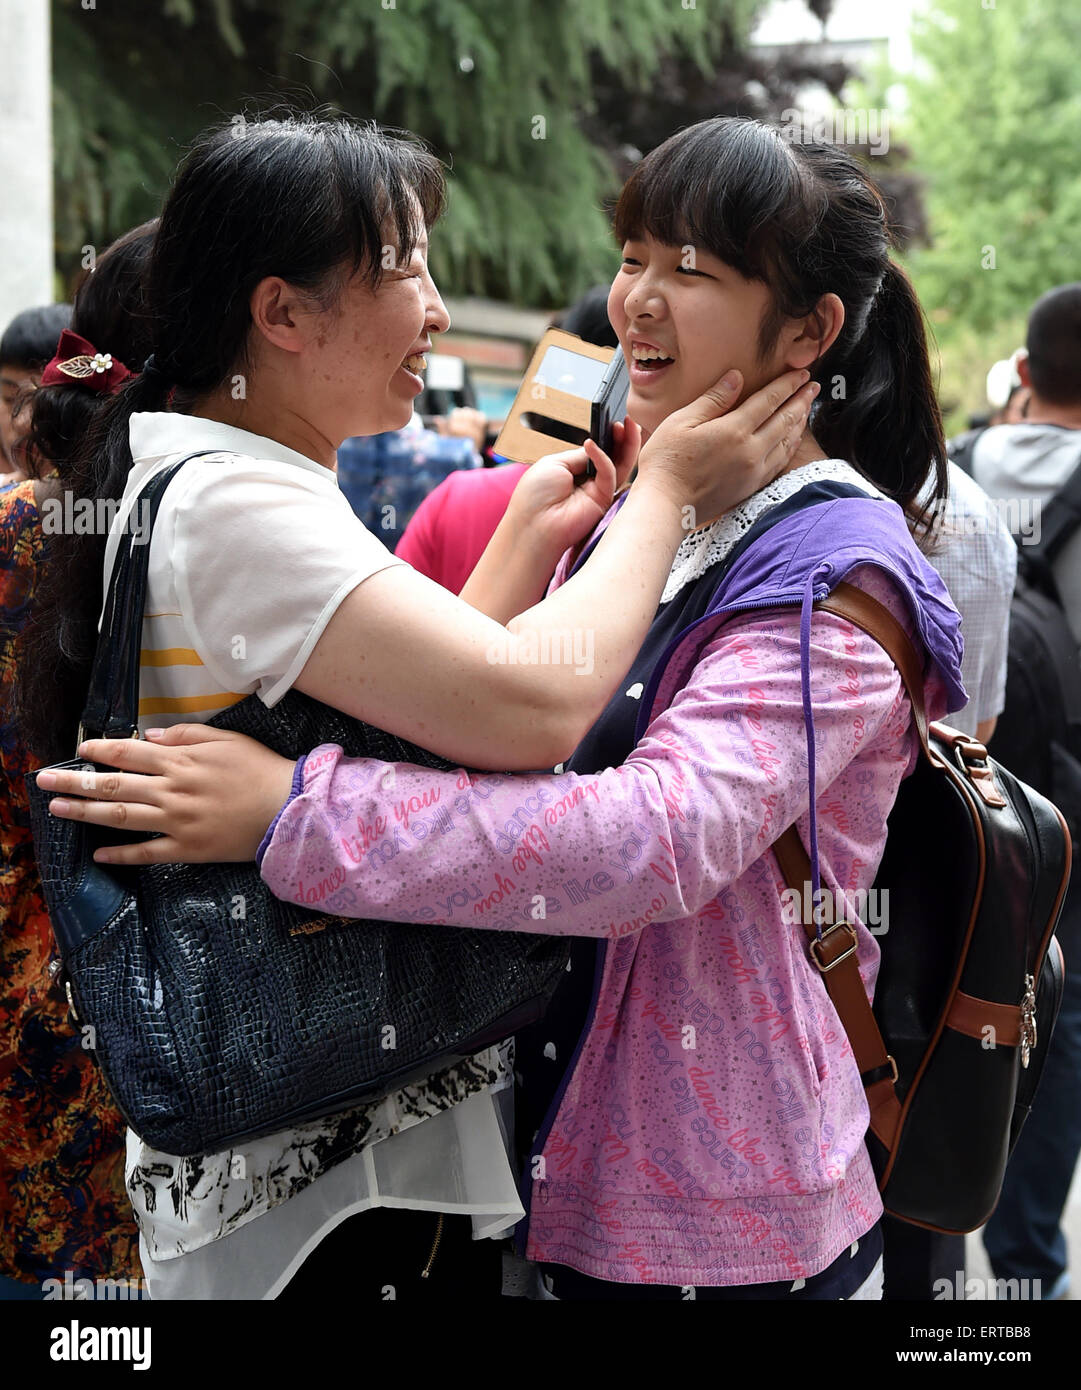 Zhengzhou, China's Henan Province. 8th June, 2015. A student hugs her mother after finishing the National College Entrance Exam (NCEE) at Zhengzhou Huimin Middle School in Zhengzhou, capital of central China's Henan Province, June 8, 2015. The 2015 National College Entrance Exam ended on Monday in most parts of China (in a few provinces the NCEE will last for one more day). A total of 9.42 million students sat for the exams this year. © Li Bo/Xinhua/Alamy Live News Stock Photo